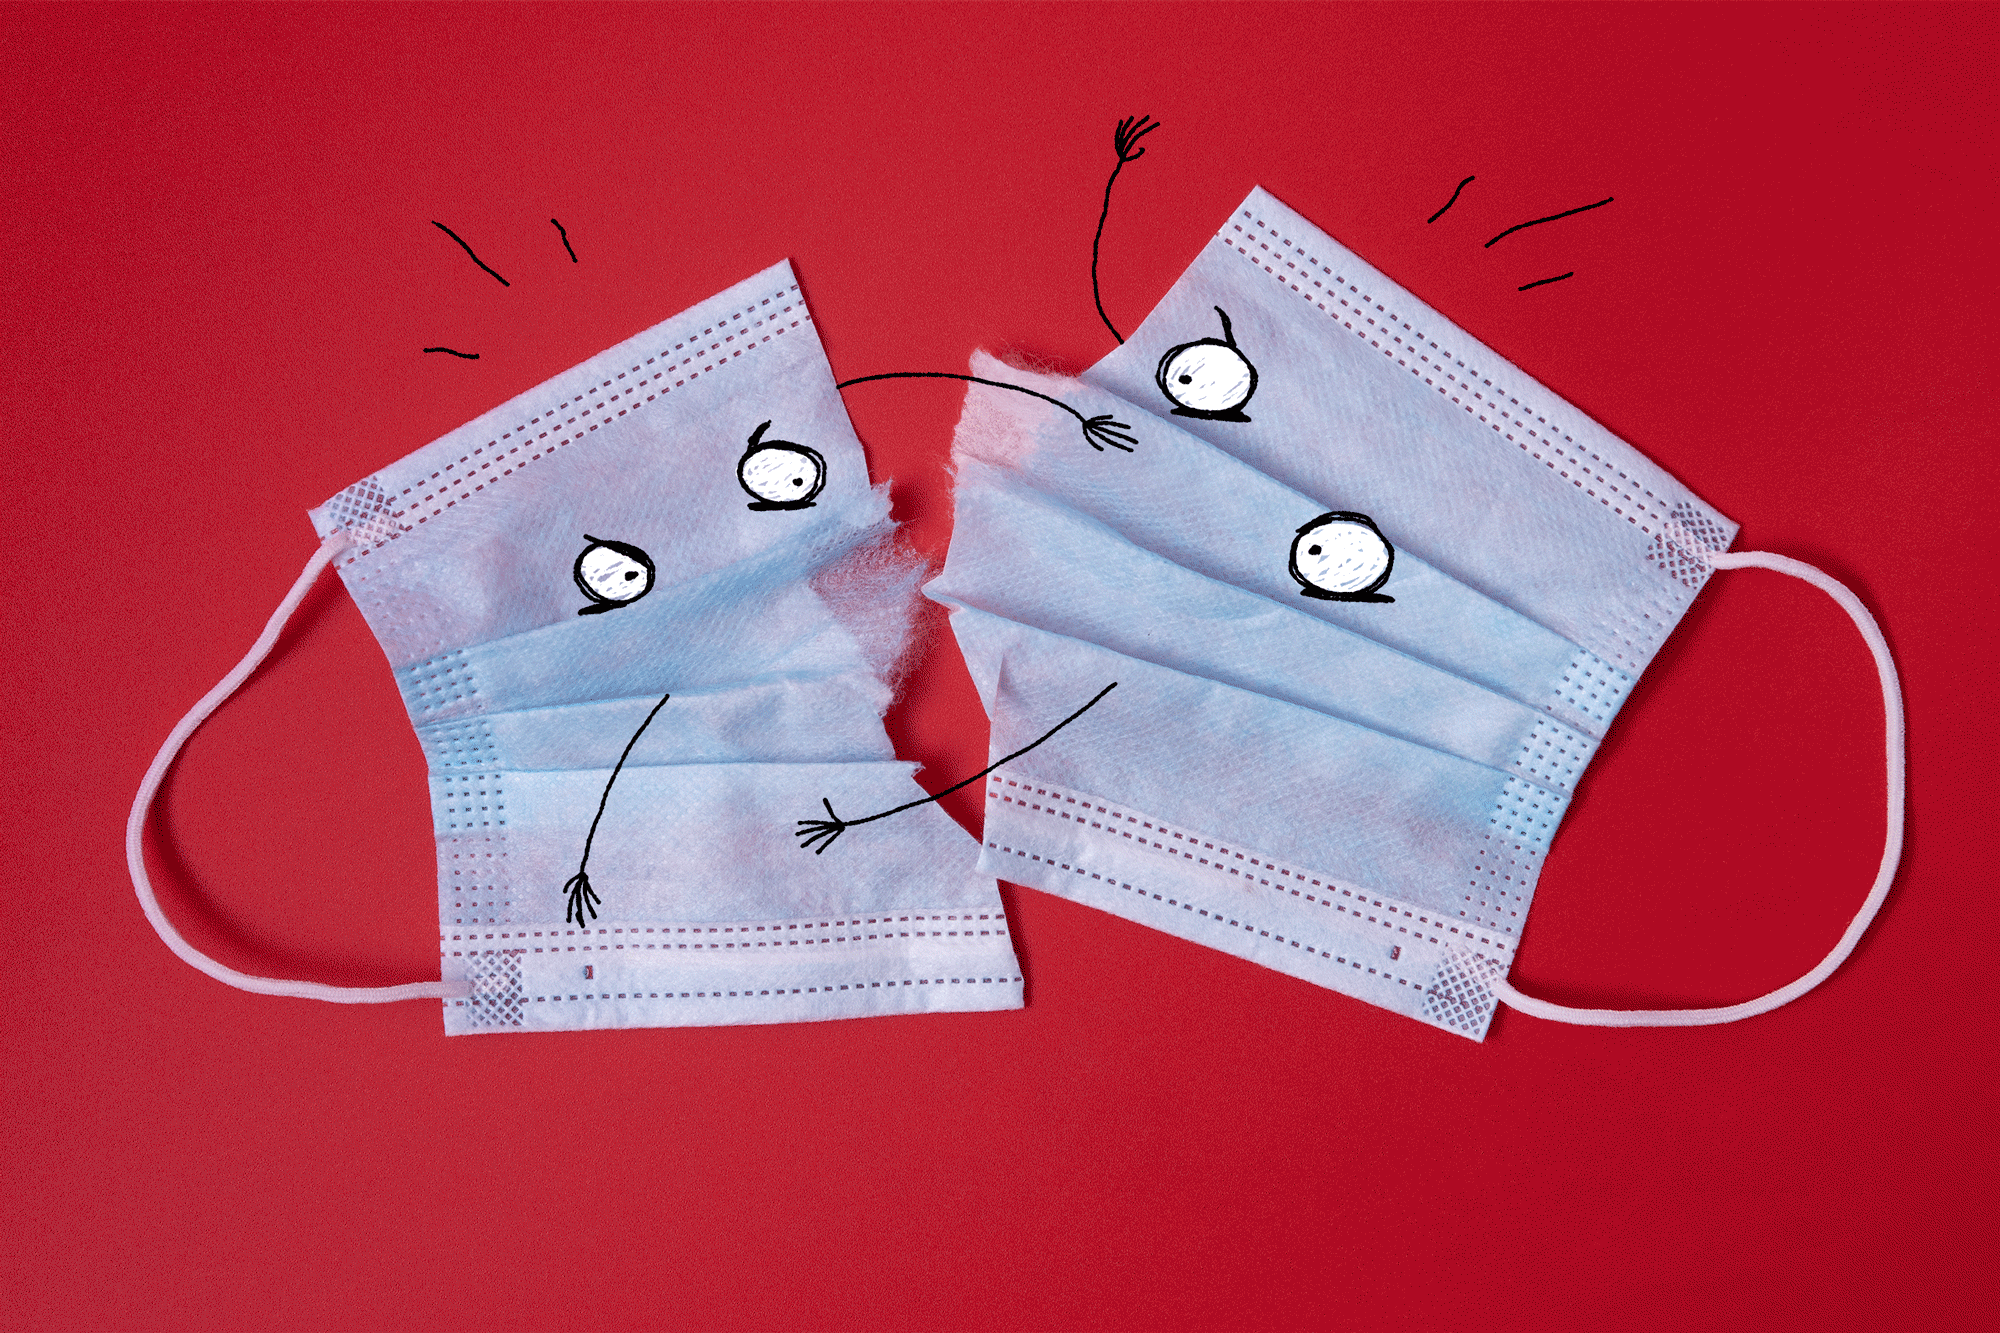 Illustration of two halves of a torn surgical face mask with cartoon eyes and arms slapping each other.